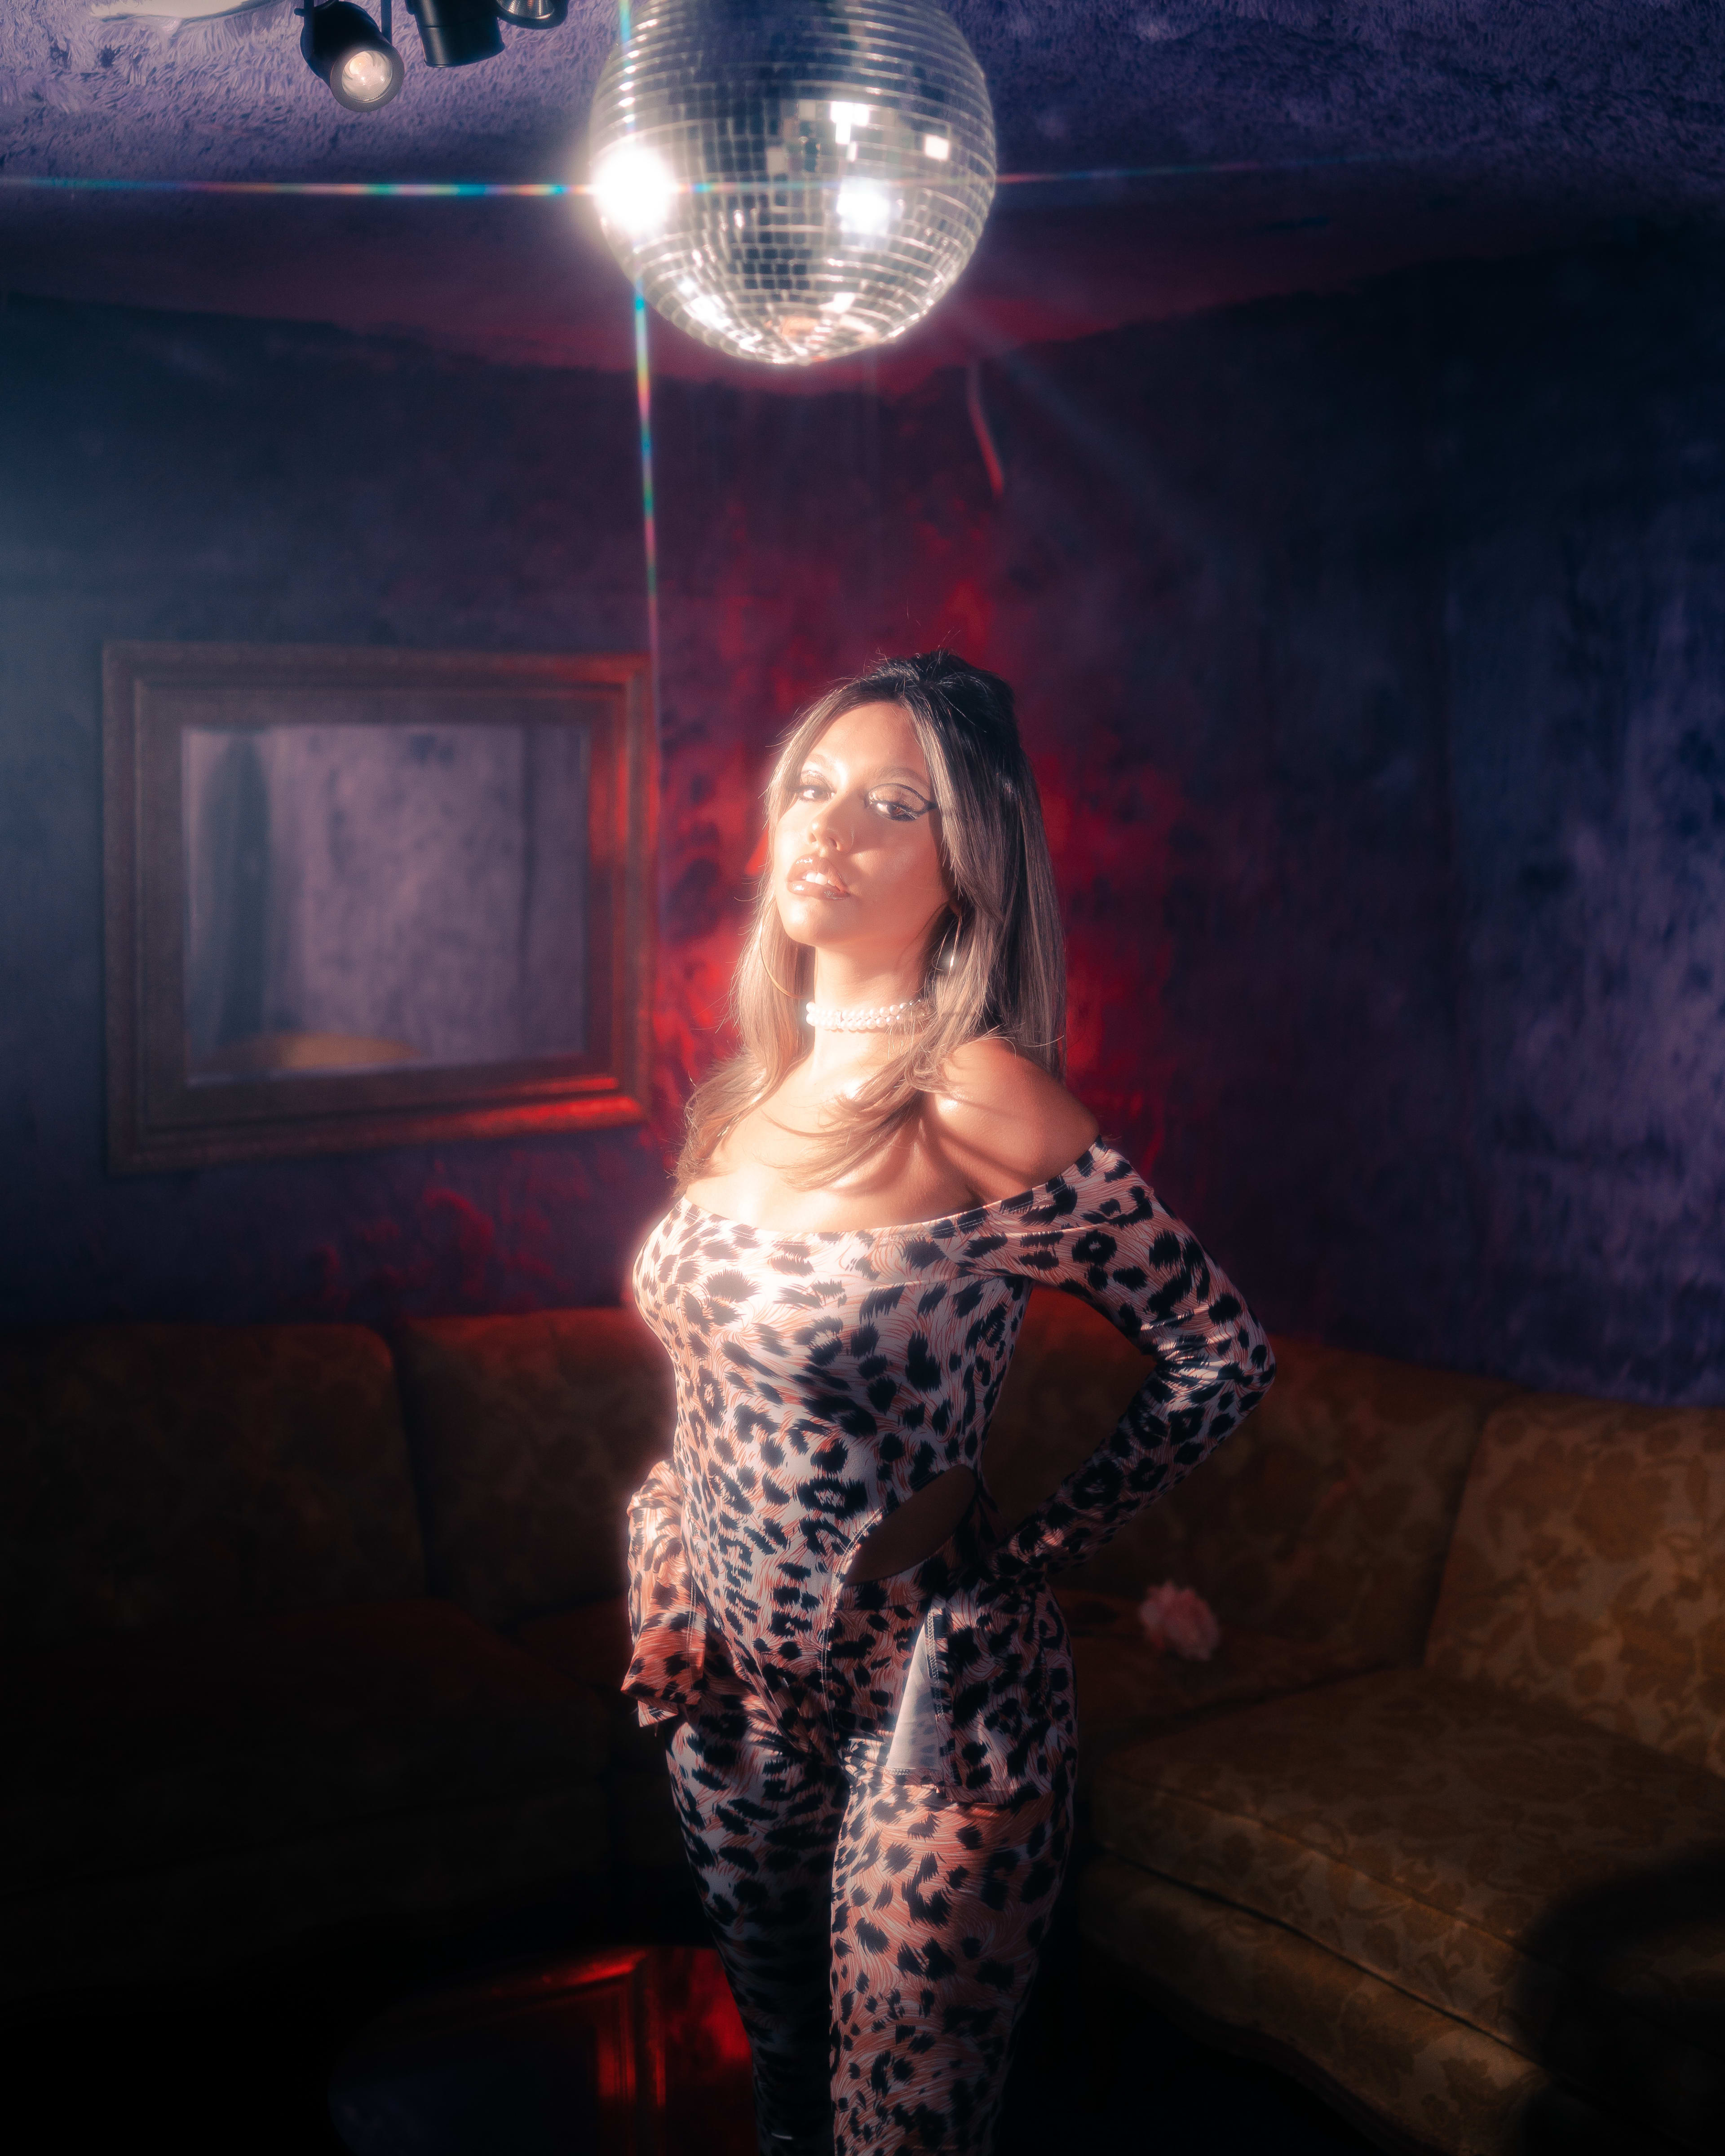 A retro photoshoot of a woman posing in a room with a disco ball hanging from the ceiling.